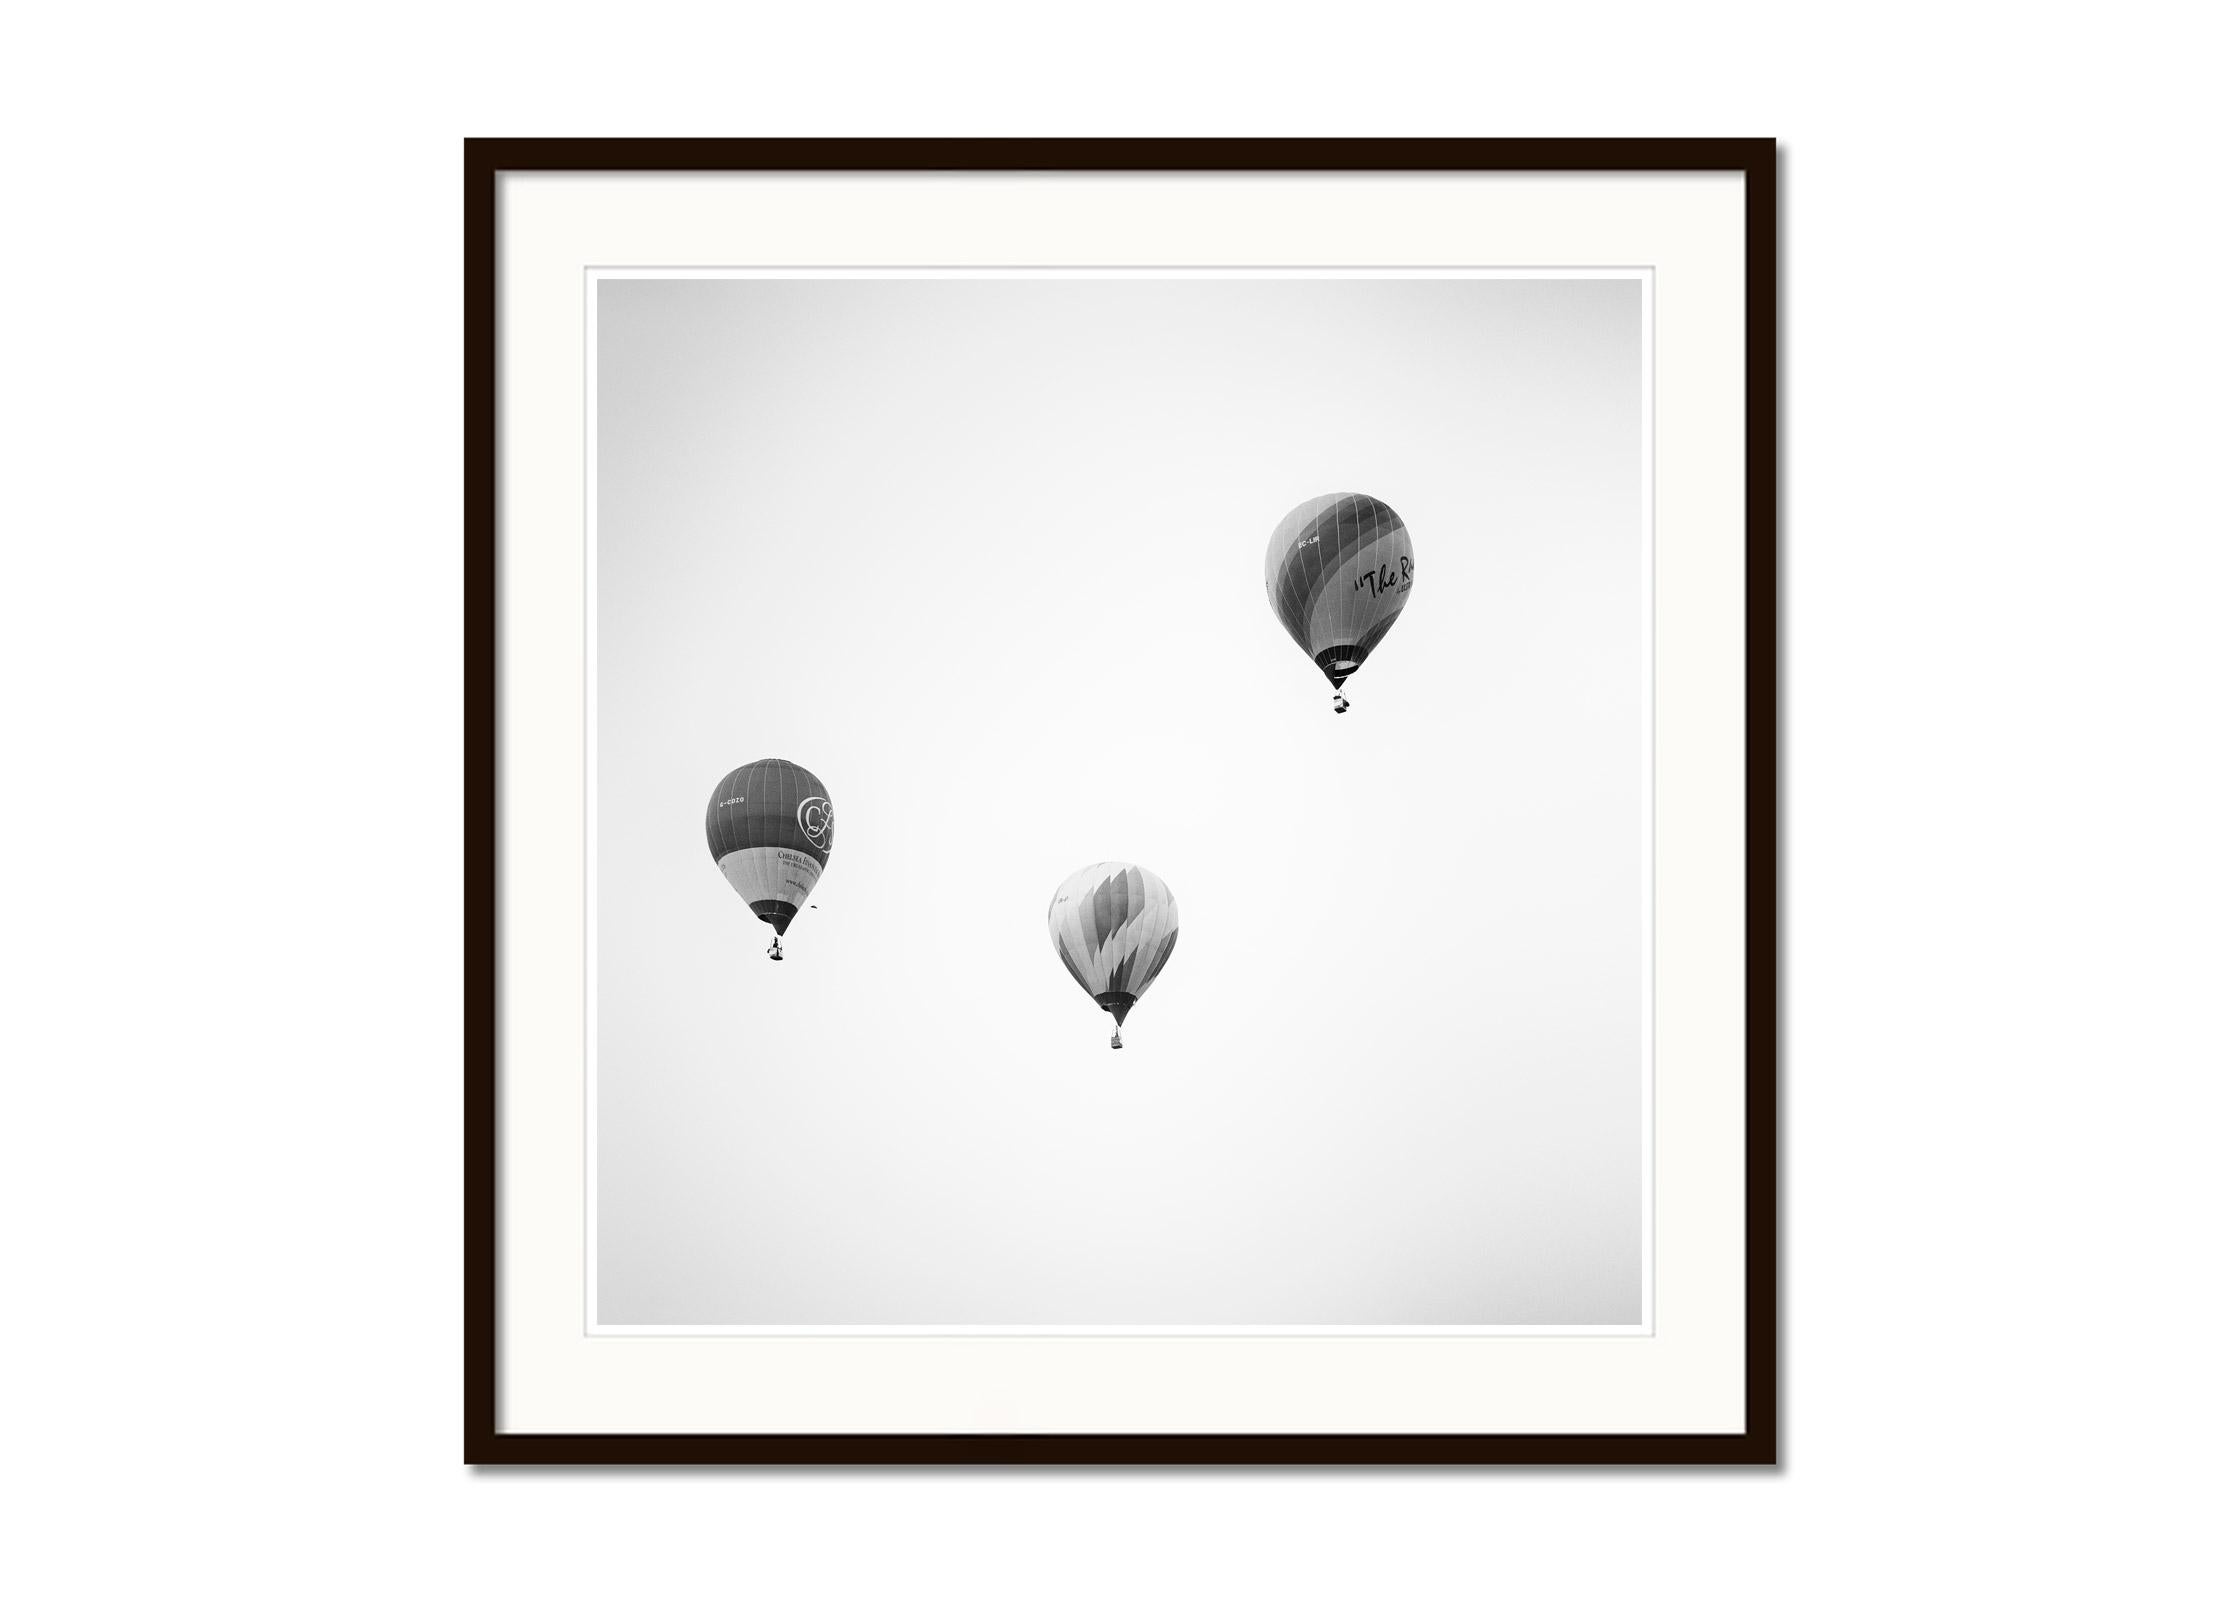 Hot Air Balloon, Championship, minimalist black and white photography, landscape - Gray Black and White Photograph by Gerald Berghammer